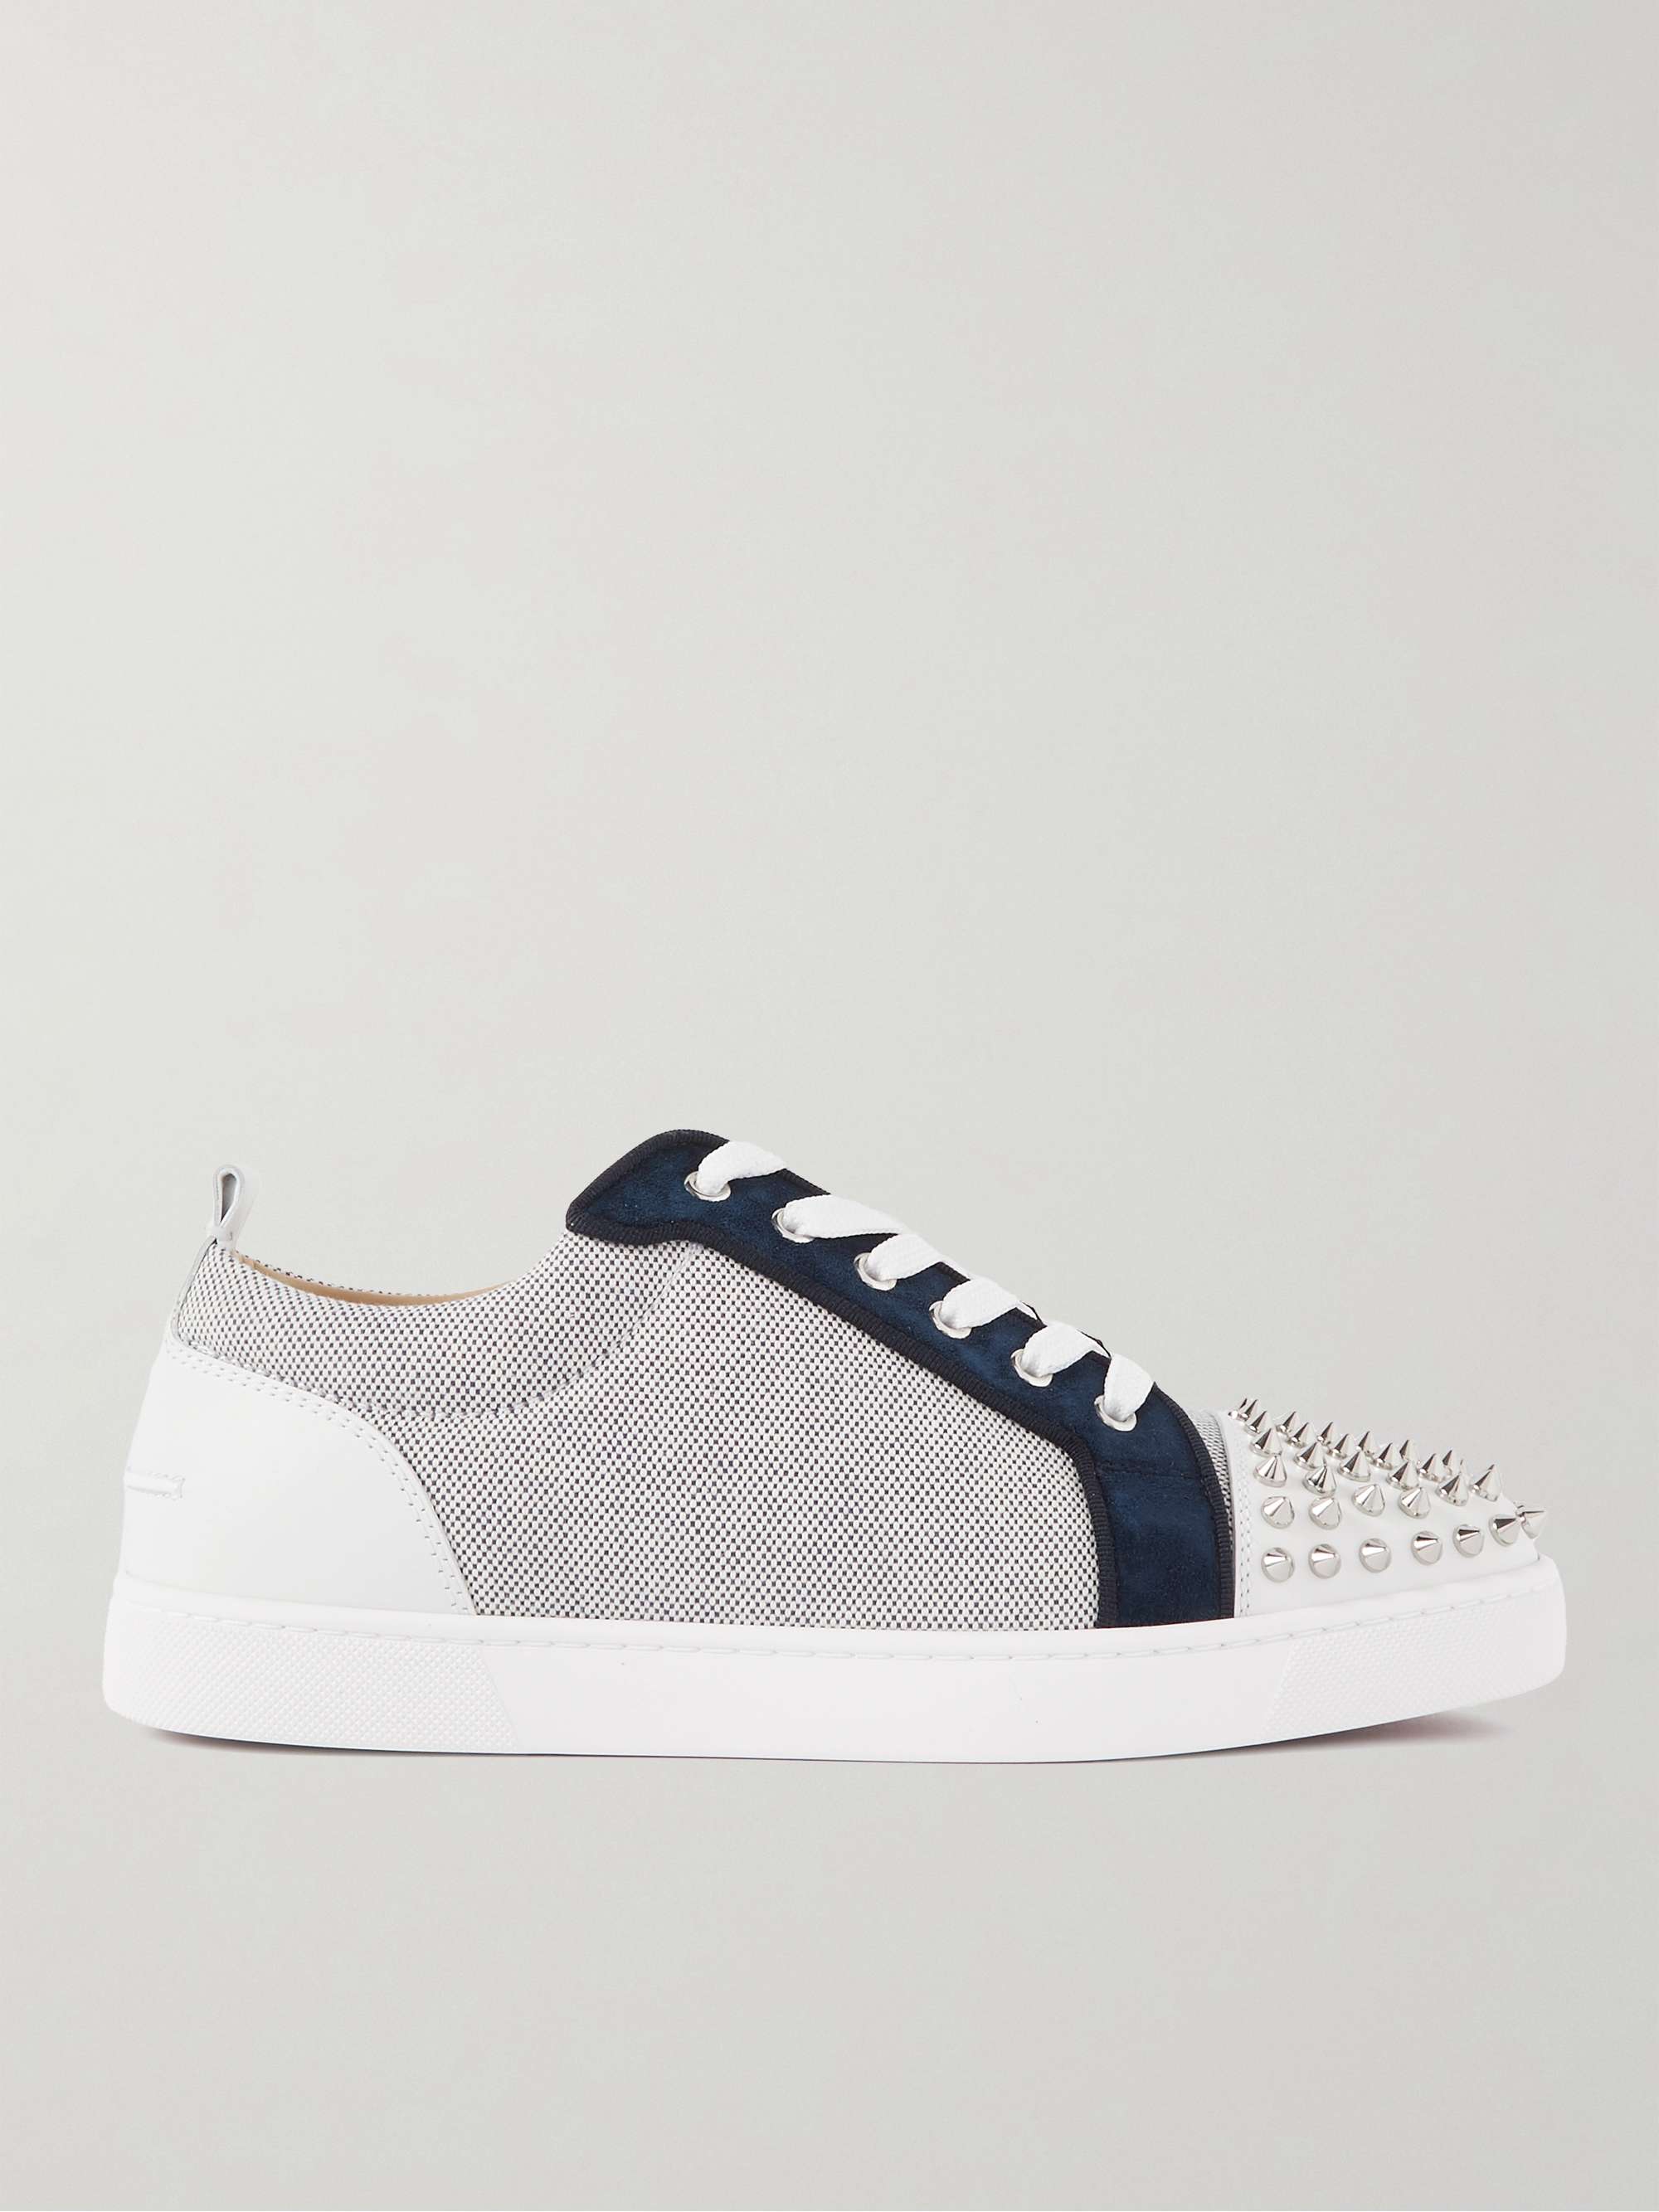 CHRISTIAN LOUBOUTIN Louis Junior Studded Leather-Trimmed Canvas Sneakers |  MR PORTER